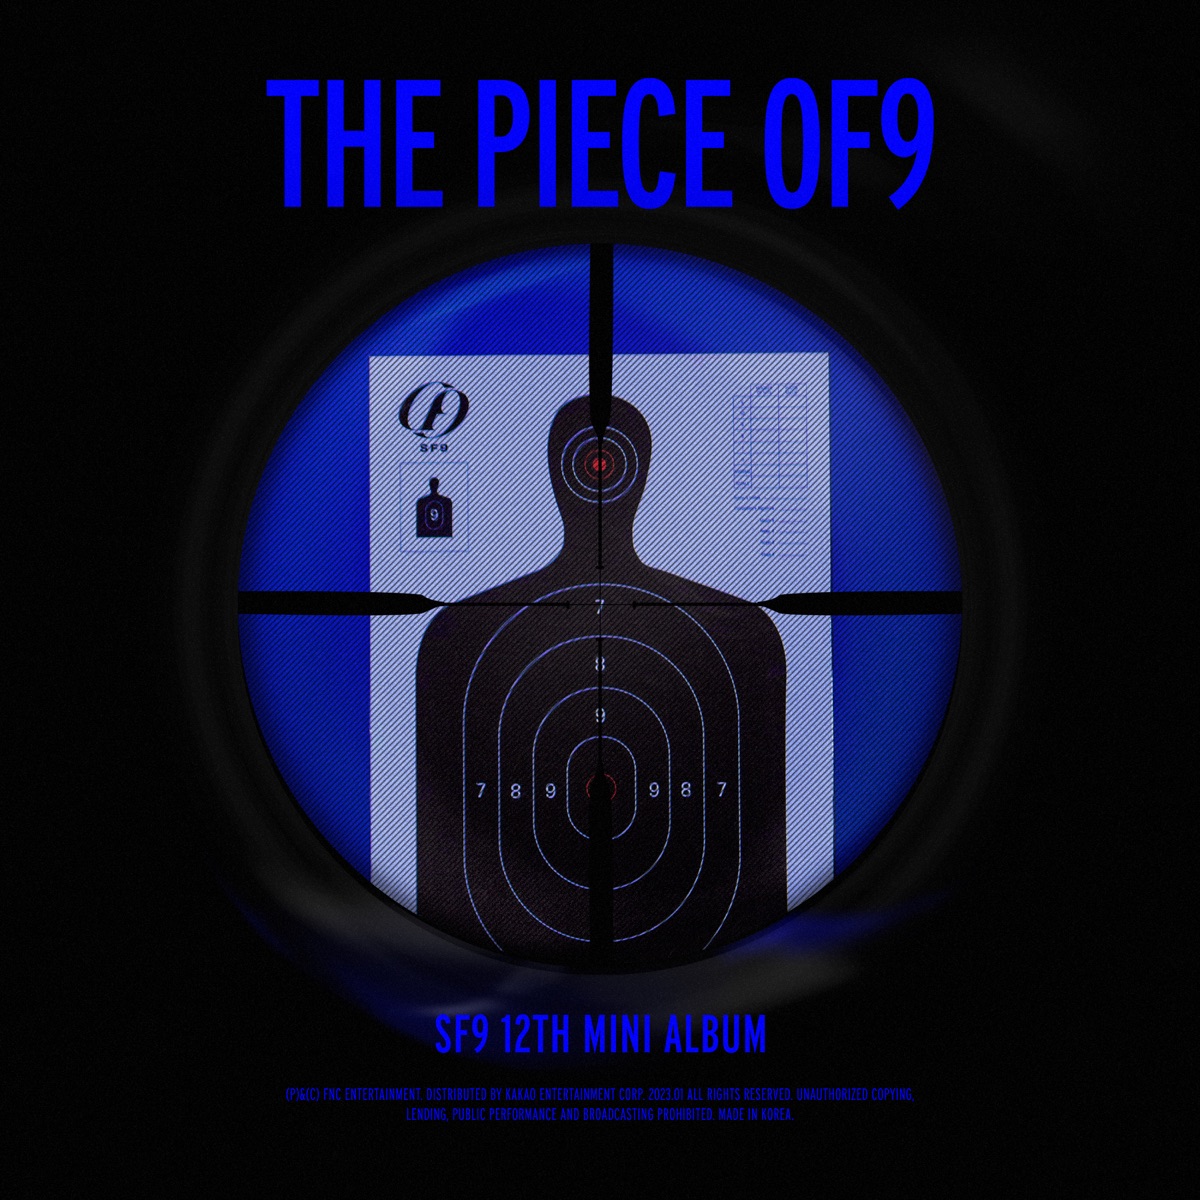 SF9 – THE PIECE OF9 – EP